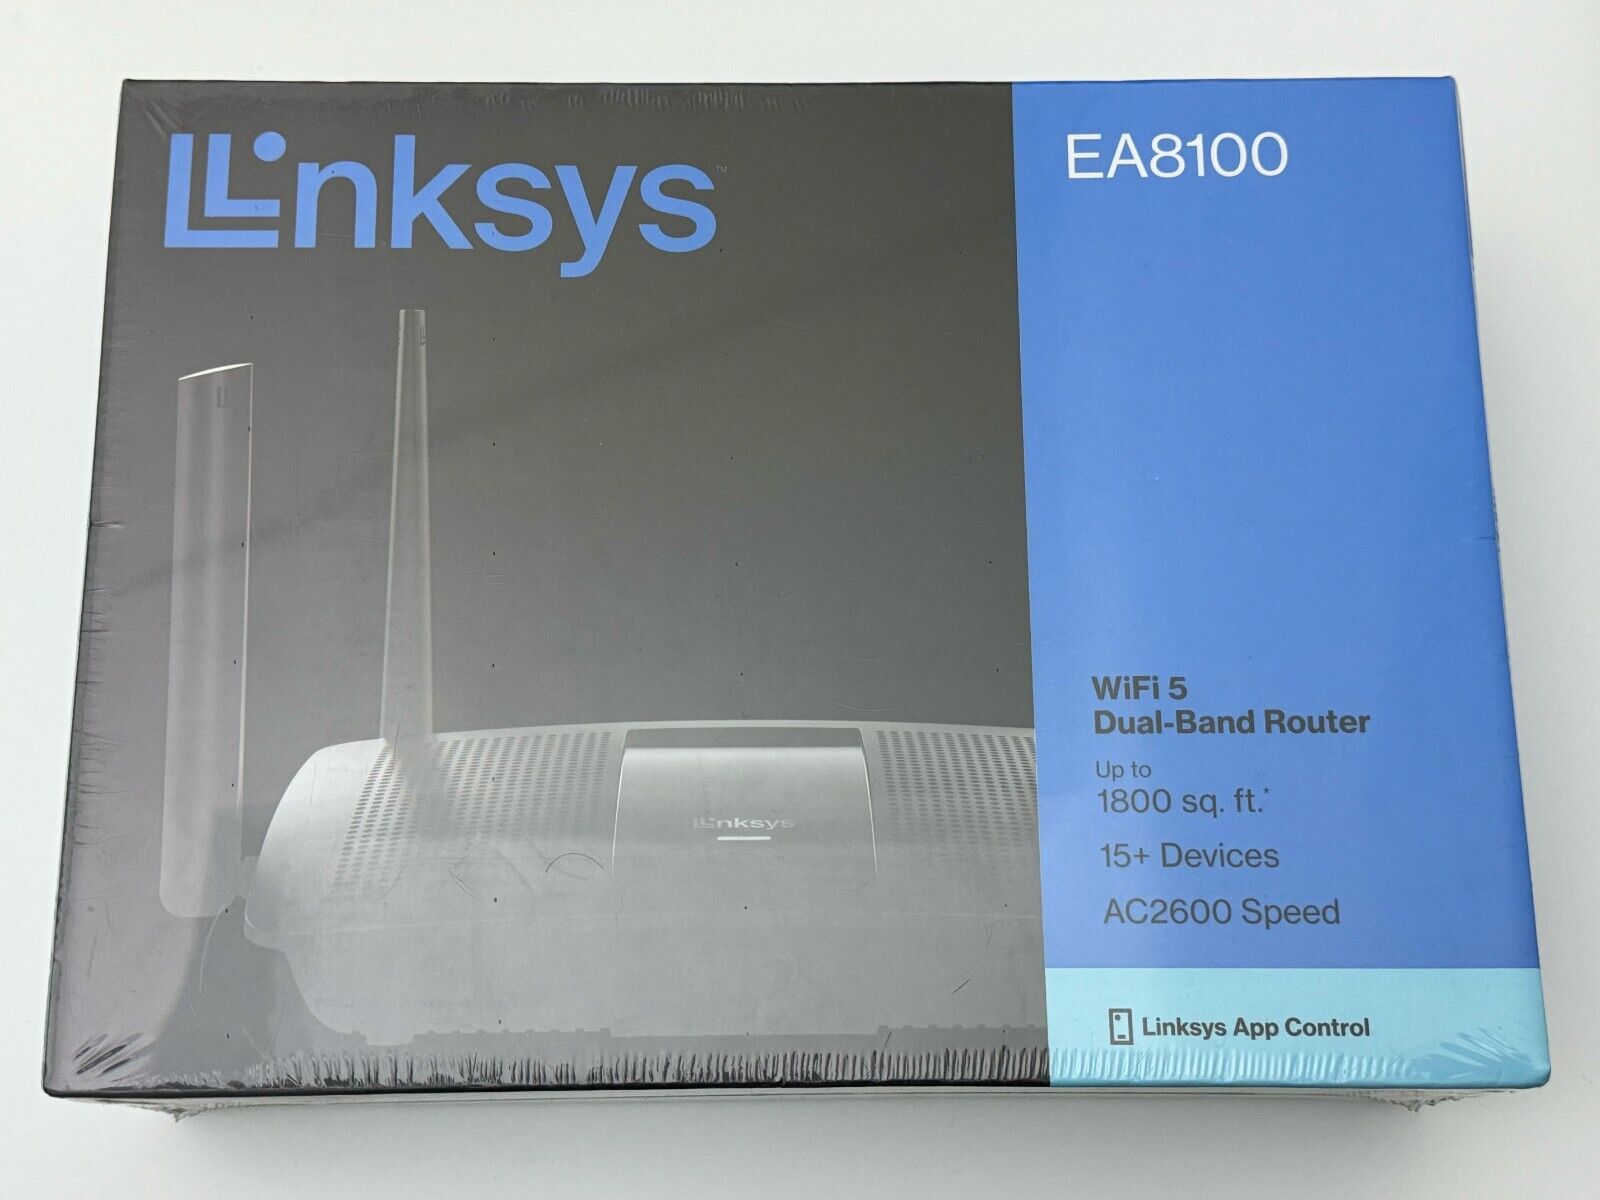 Linksys AC2600 4x4 MU-MIMO Dual-Band Gigabit Router with USB 3.0 (EA8100)